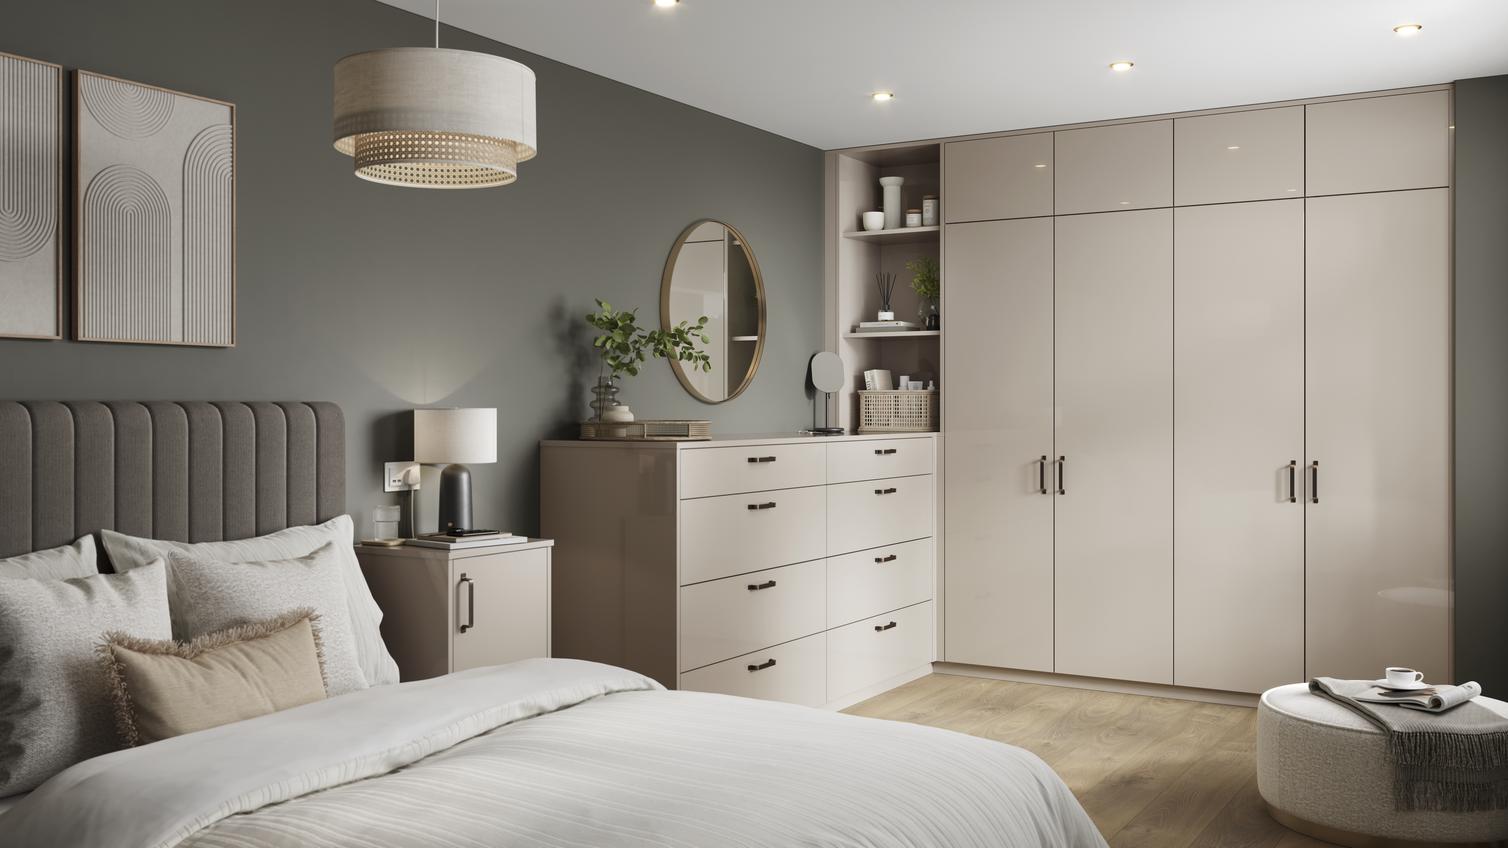 Hockley Gloss Sandstone Bedroom Warderobe, Chest of Drawers, and Bedside Table